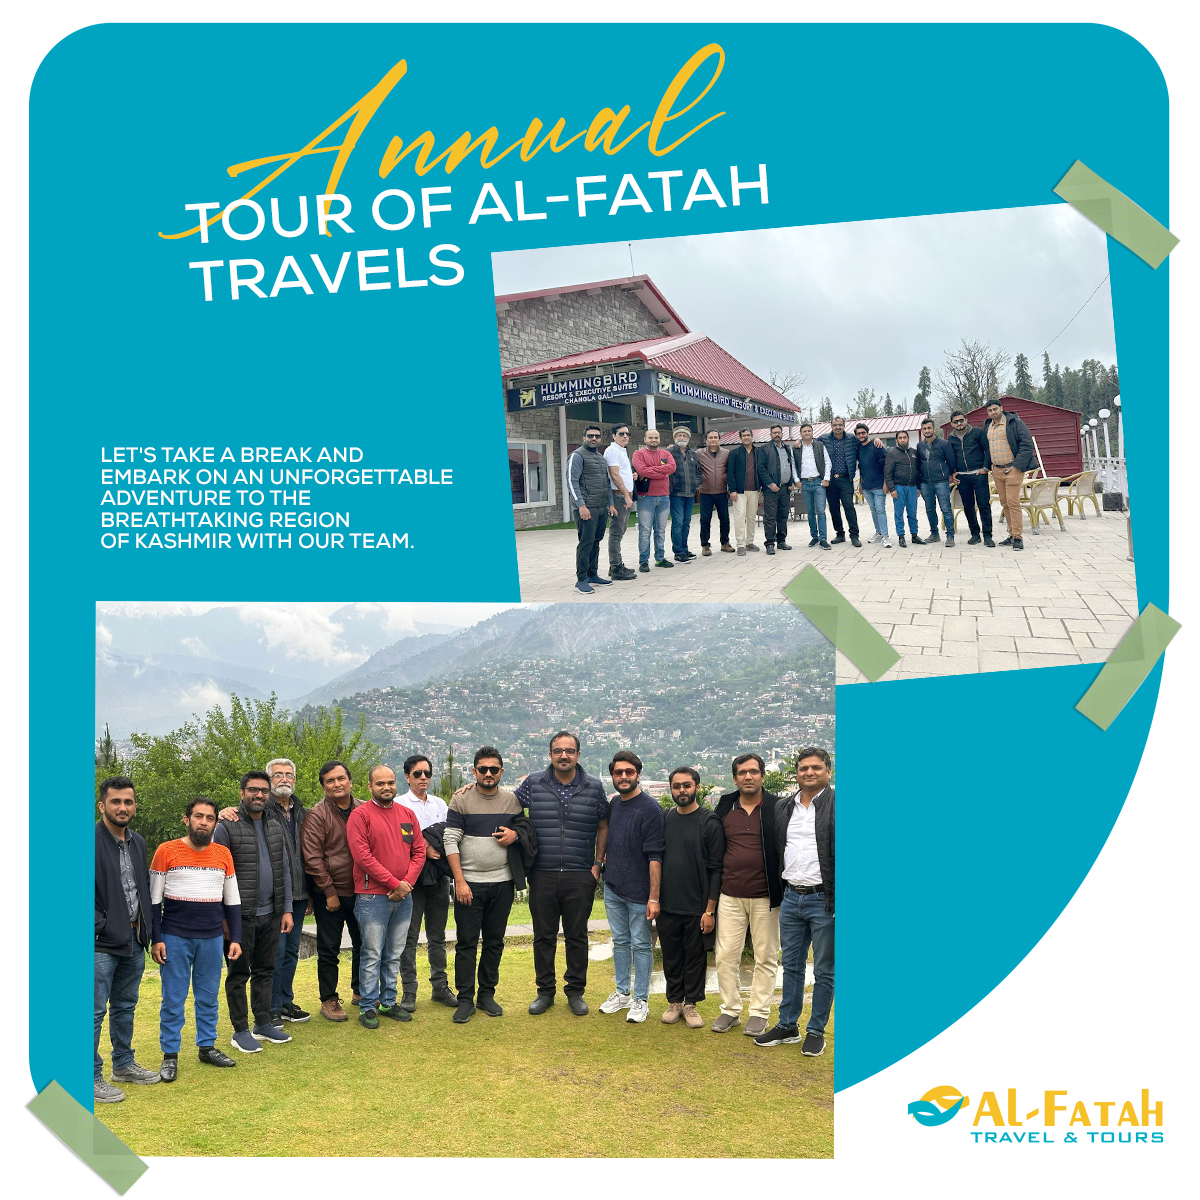 Glimpses from an unforgettable Annual Tour with the Managing Director, Dr Ahmed Aftab Sheikh. Creating unforgettable memories amidst the enchanting landscapes of Kashmir with our incredible team!

#AlfatahTravels #KashmirAdventure #TeamJourney #MuzaffarabadMemories